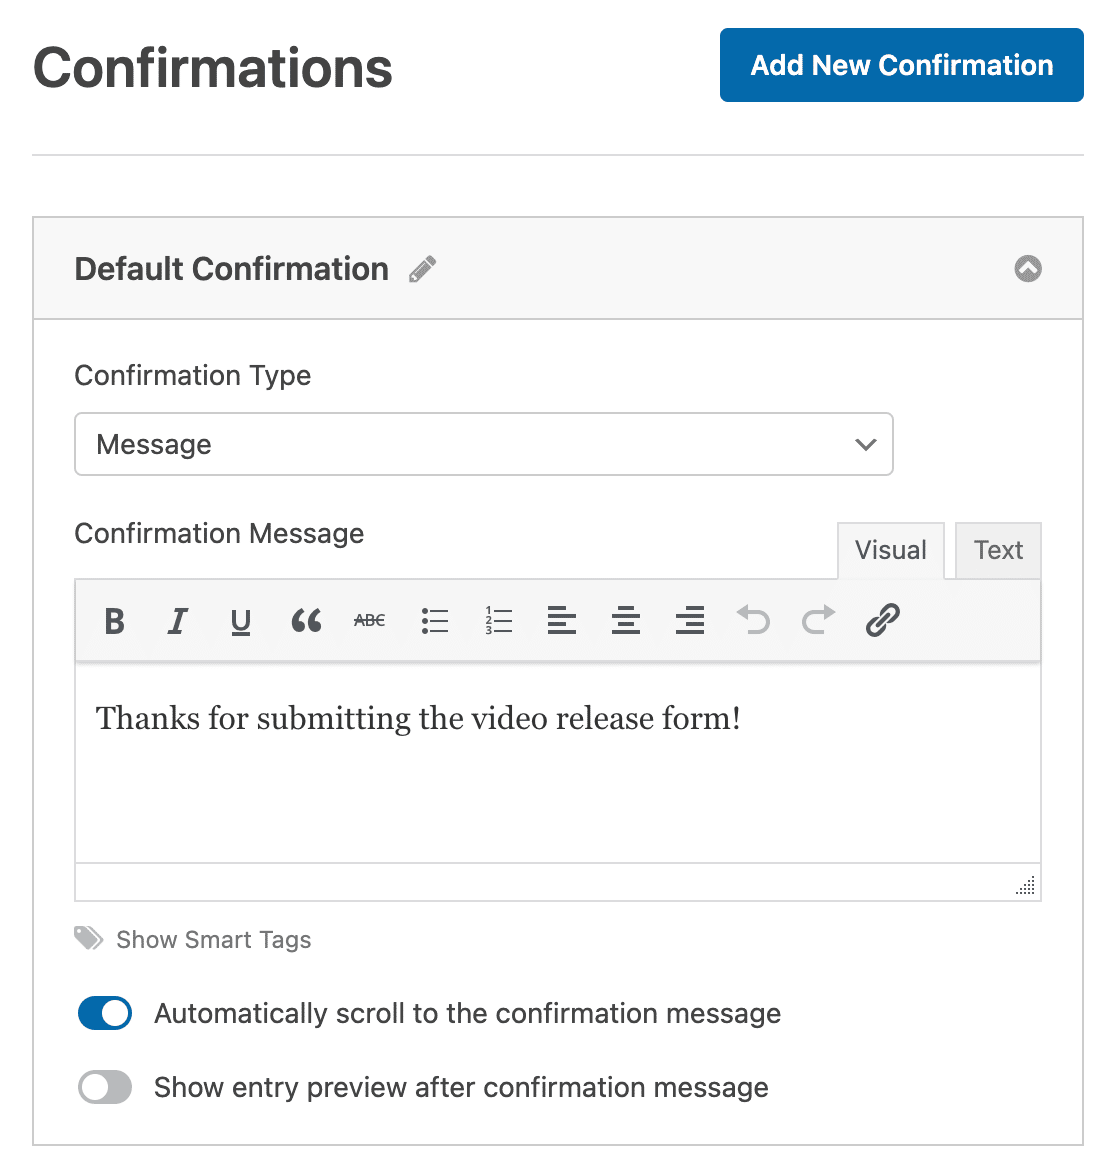 Customizing the confirmation message for a video release form